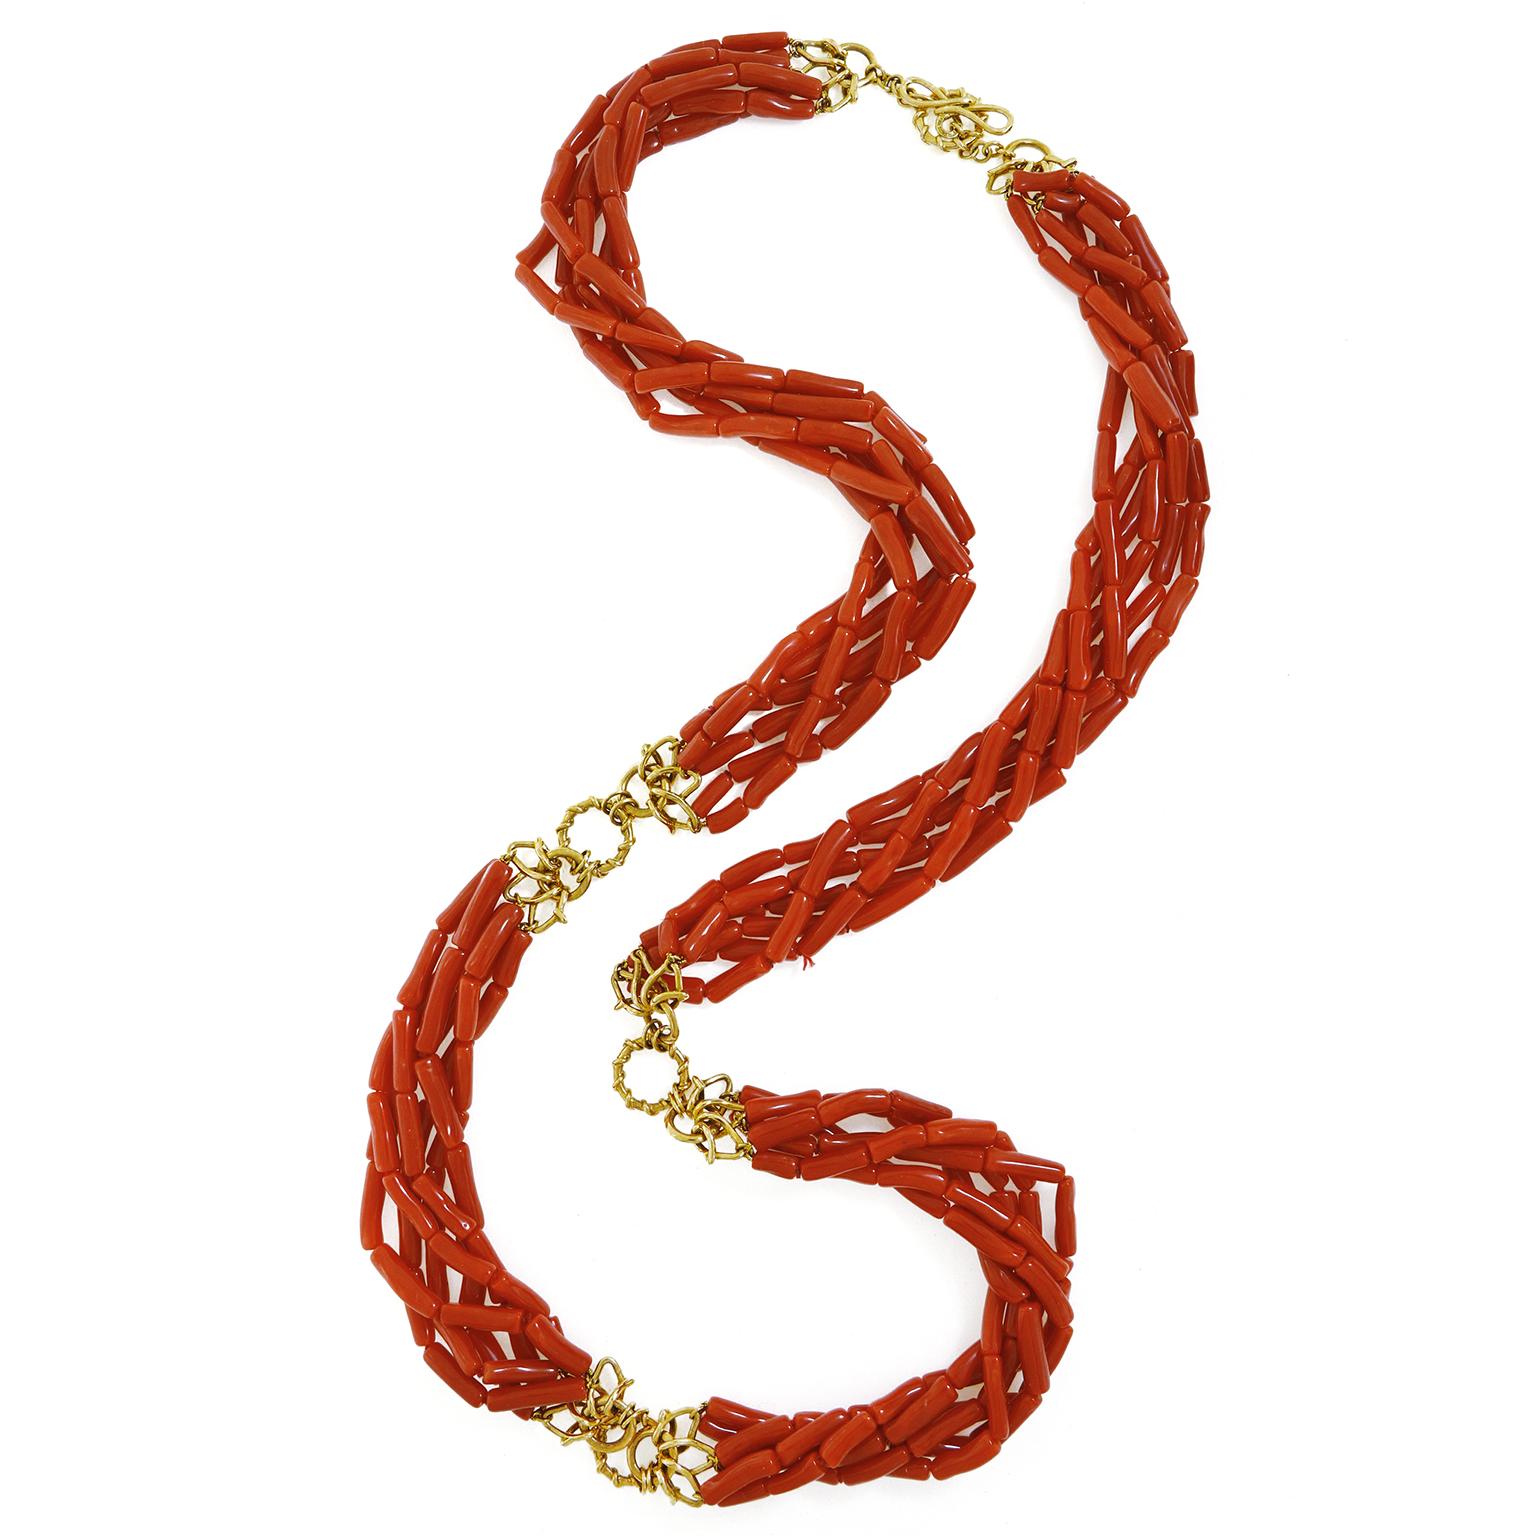 Striking red coral carved into cylindrical shape beads make up this necklace. The 6 strands are twisted in a torsade for a unique look. Three 18k yellow gold Vs are on both ends of the necklace complementing the red coral. A knot and toggle clasp